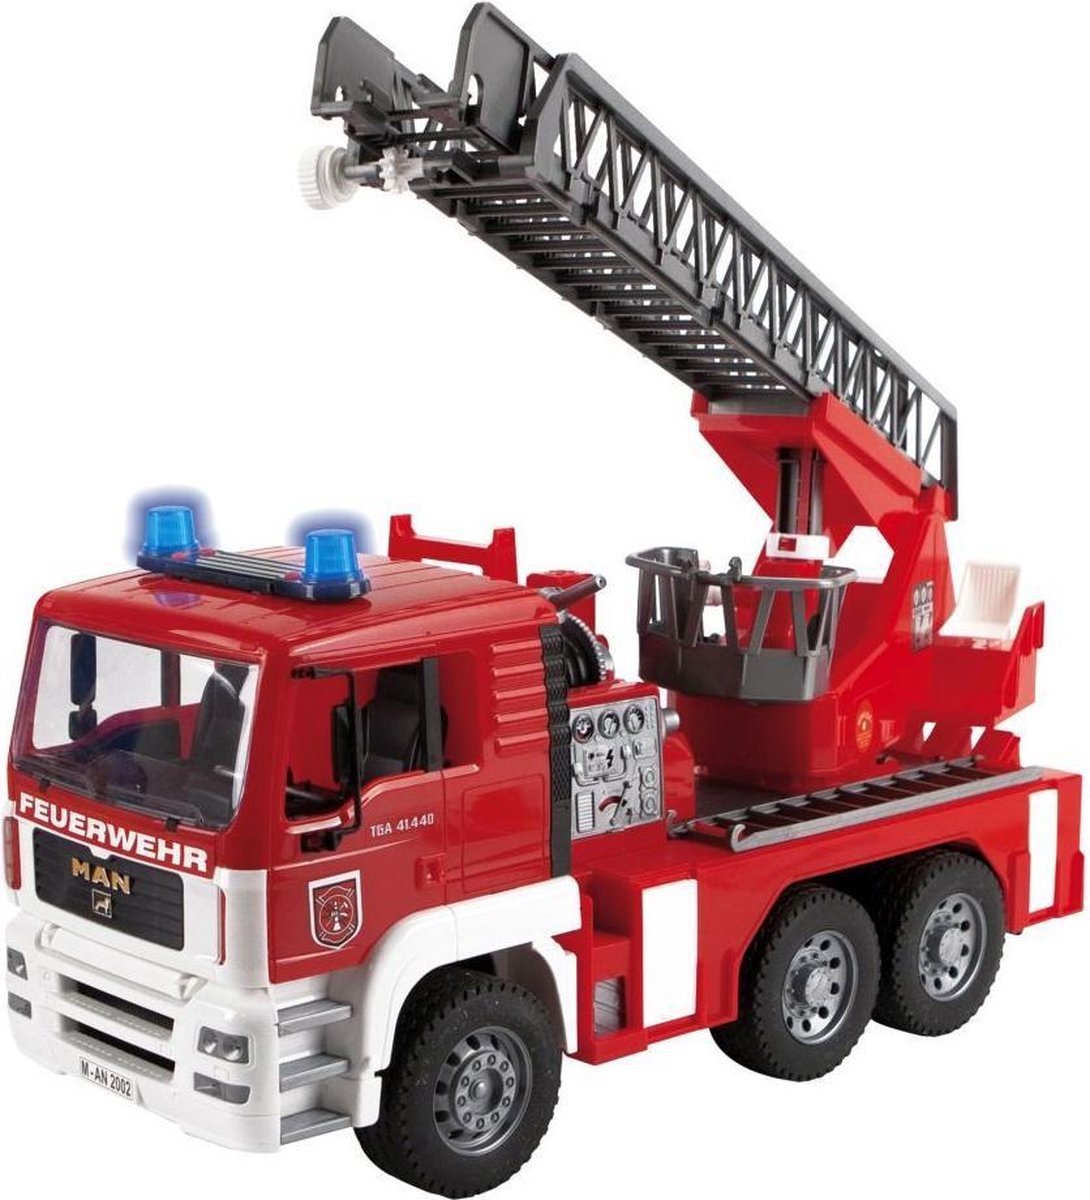 Overall best fire truck - Bruder MAN Fire Truck with Rotary Ladder